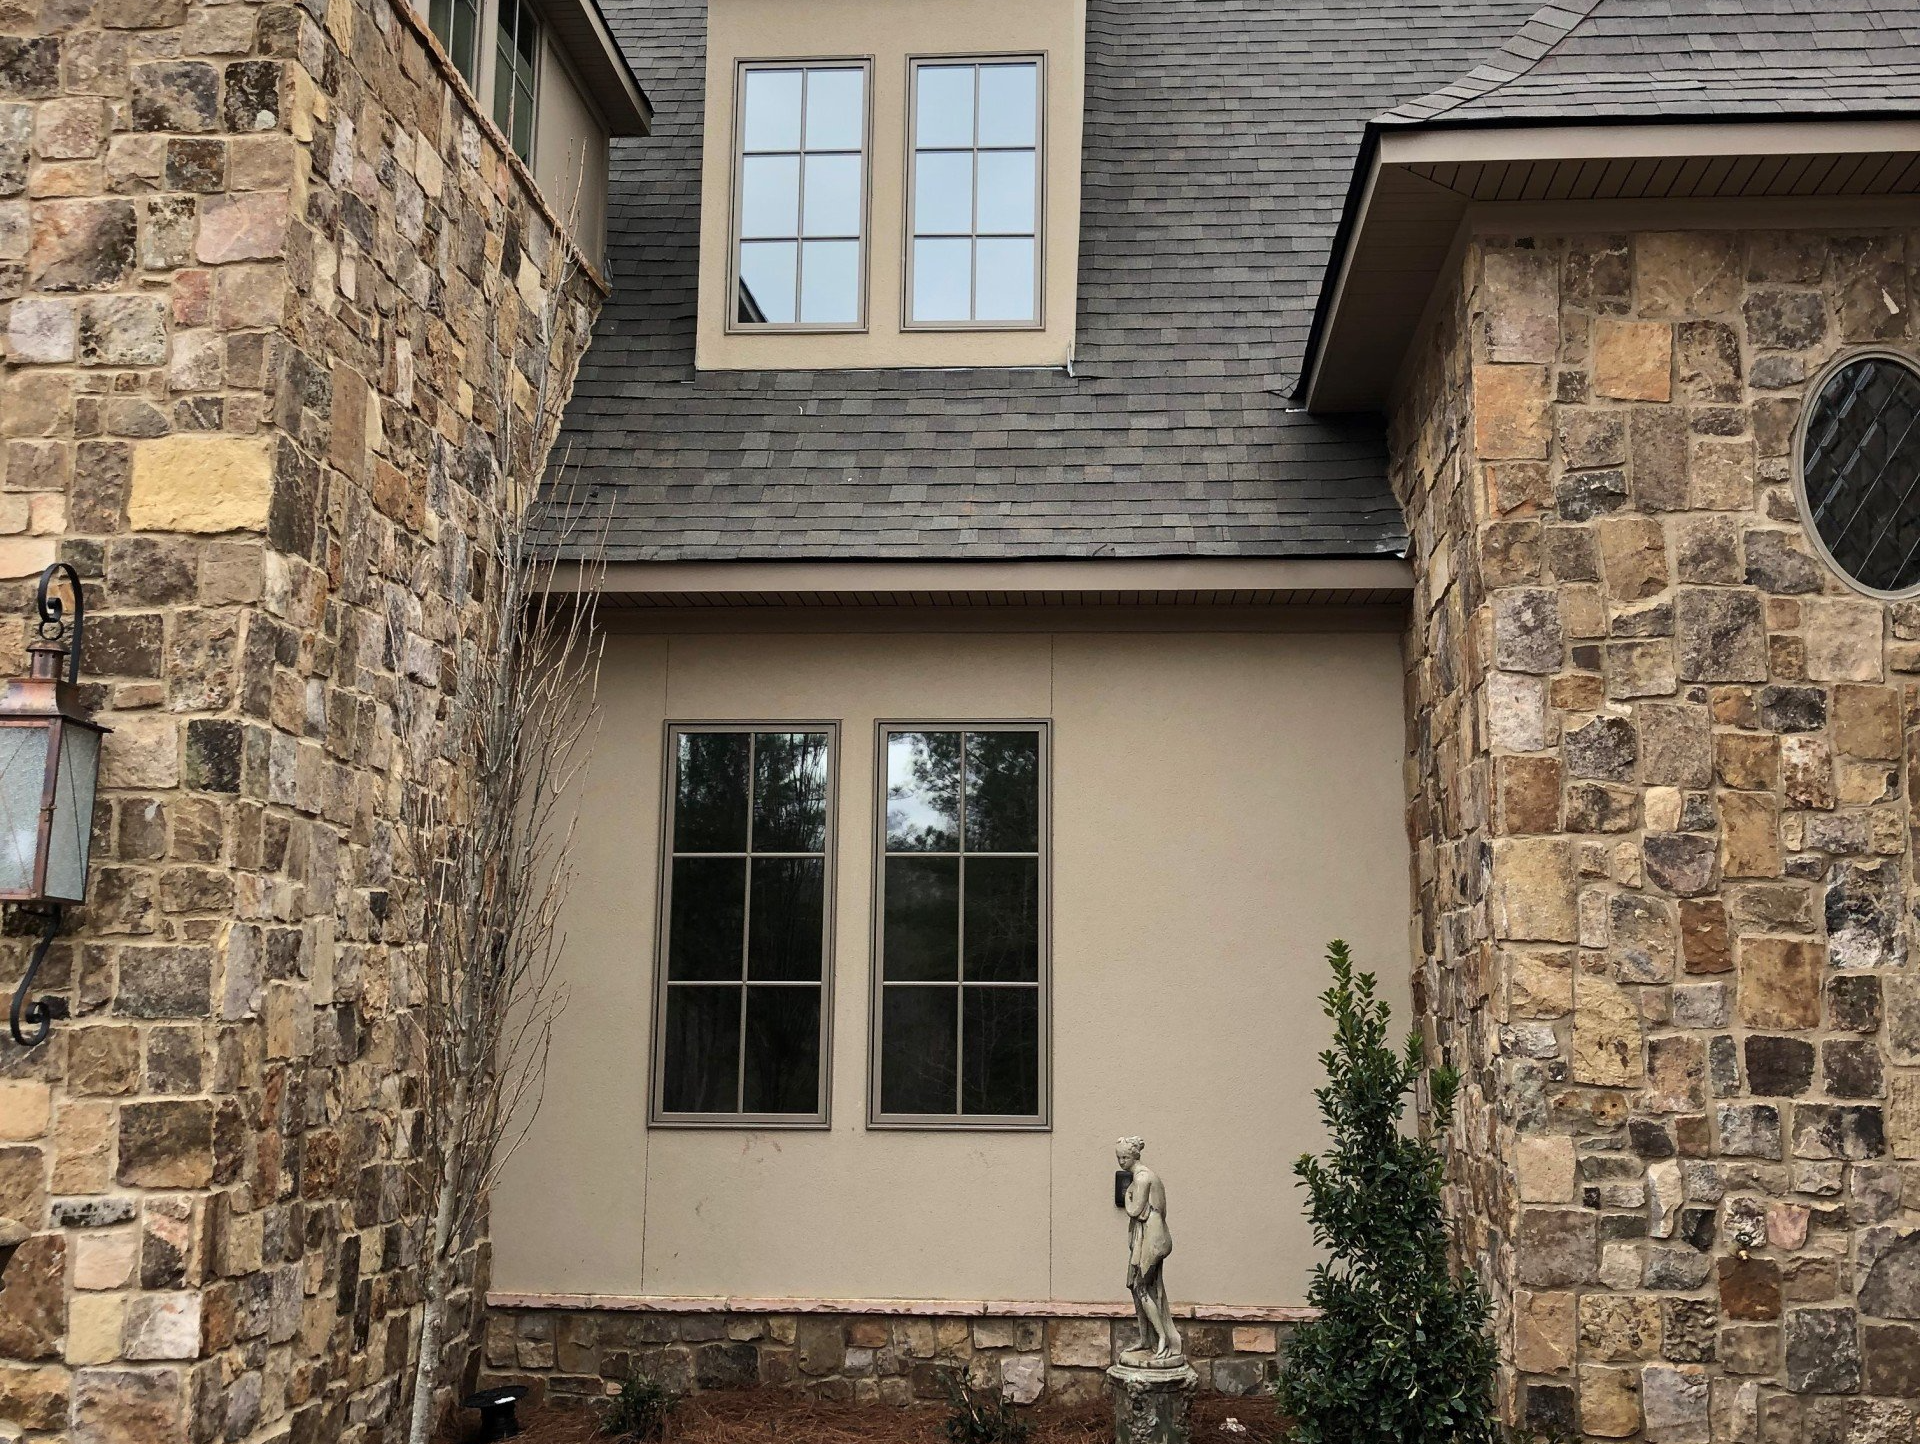 Residential Tint installation service - Home Window Tinting in Auburn, AL on 2.2.2019